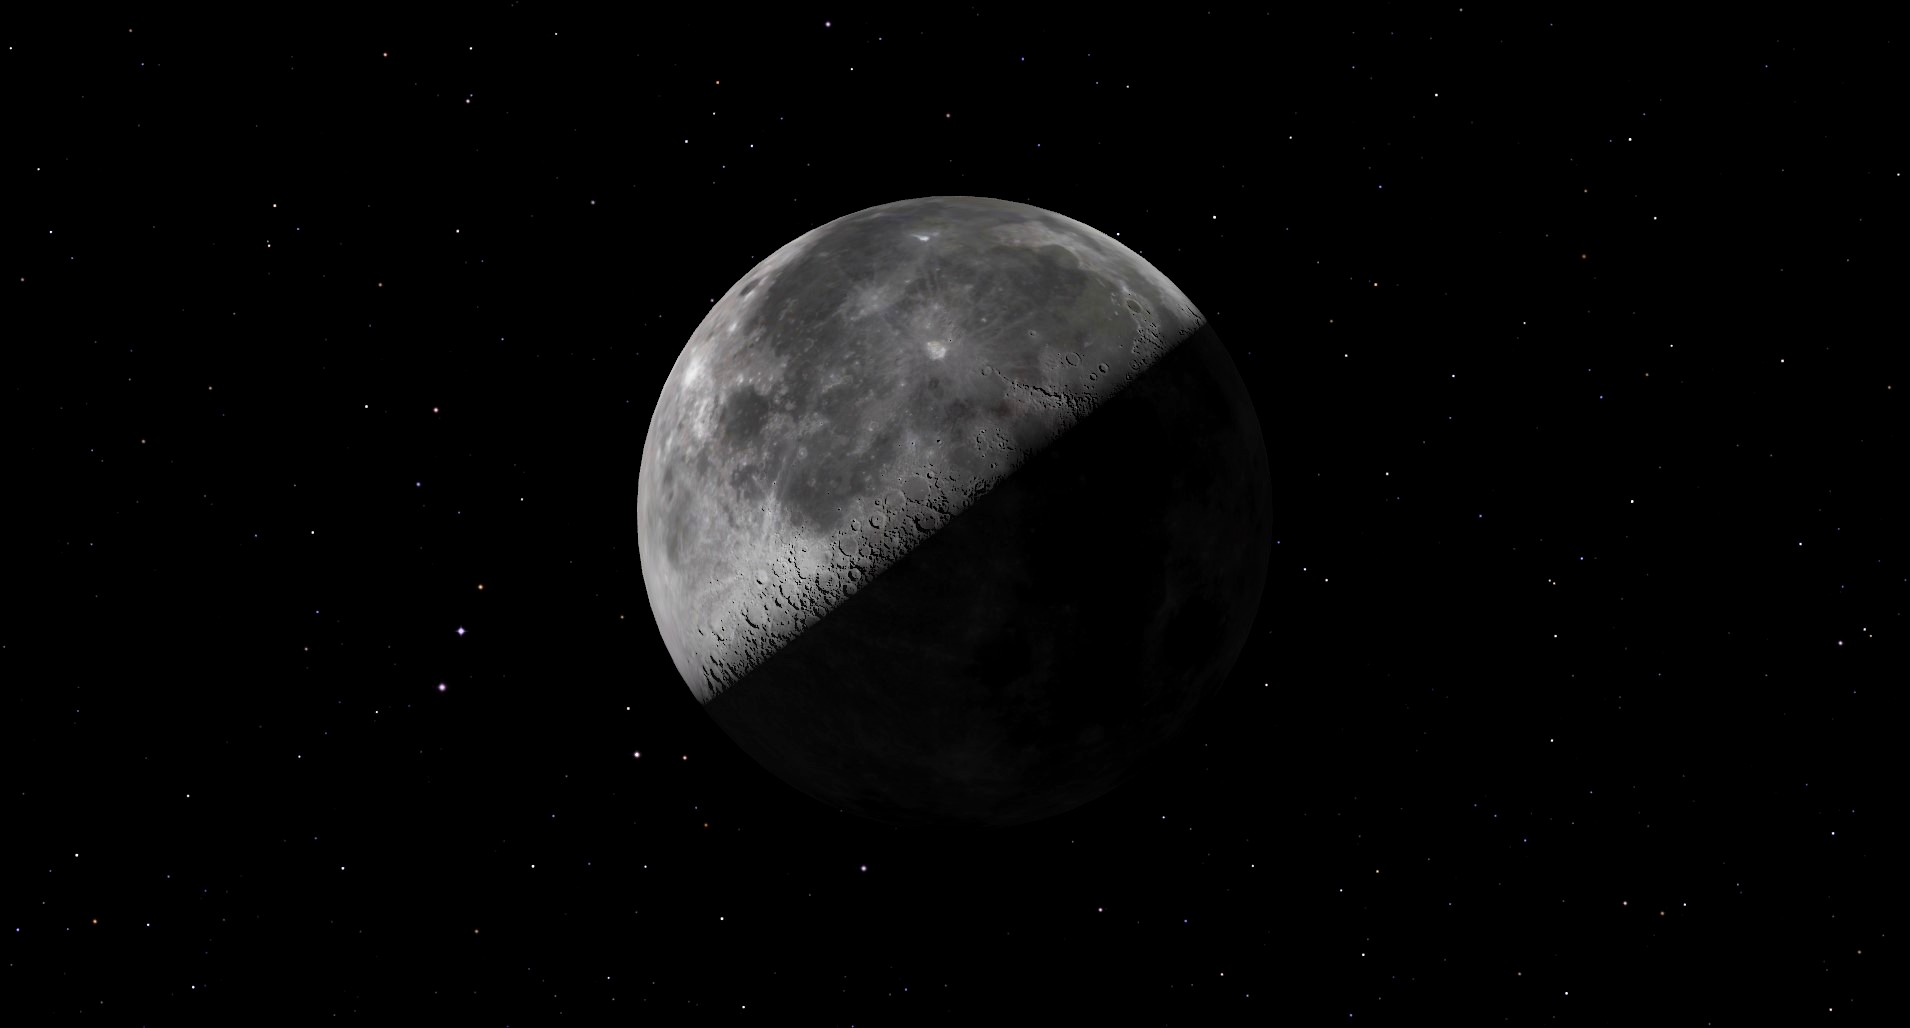 The moon will complete three quarters of its orbit around Earth, measured from the previous new moon, on Friday, October 6 at 9:48 a.m. EDT, 6:48 a.m. PDT, or 13:48 GMT.